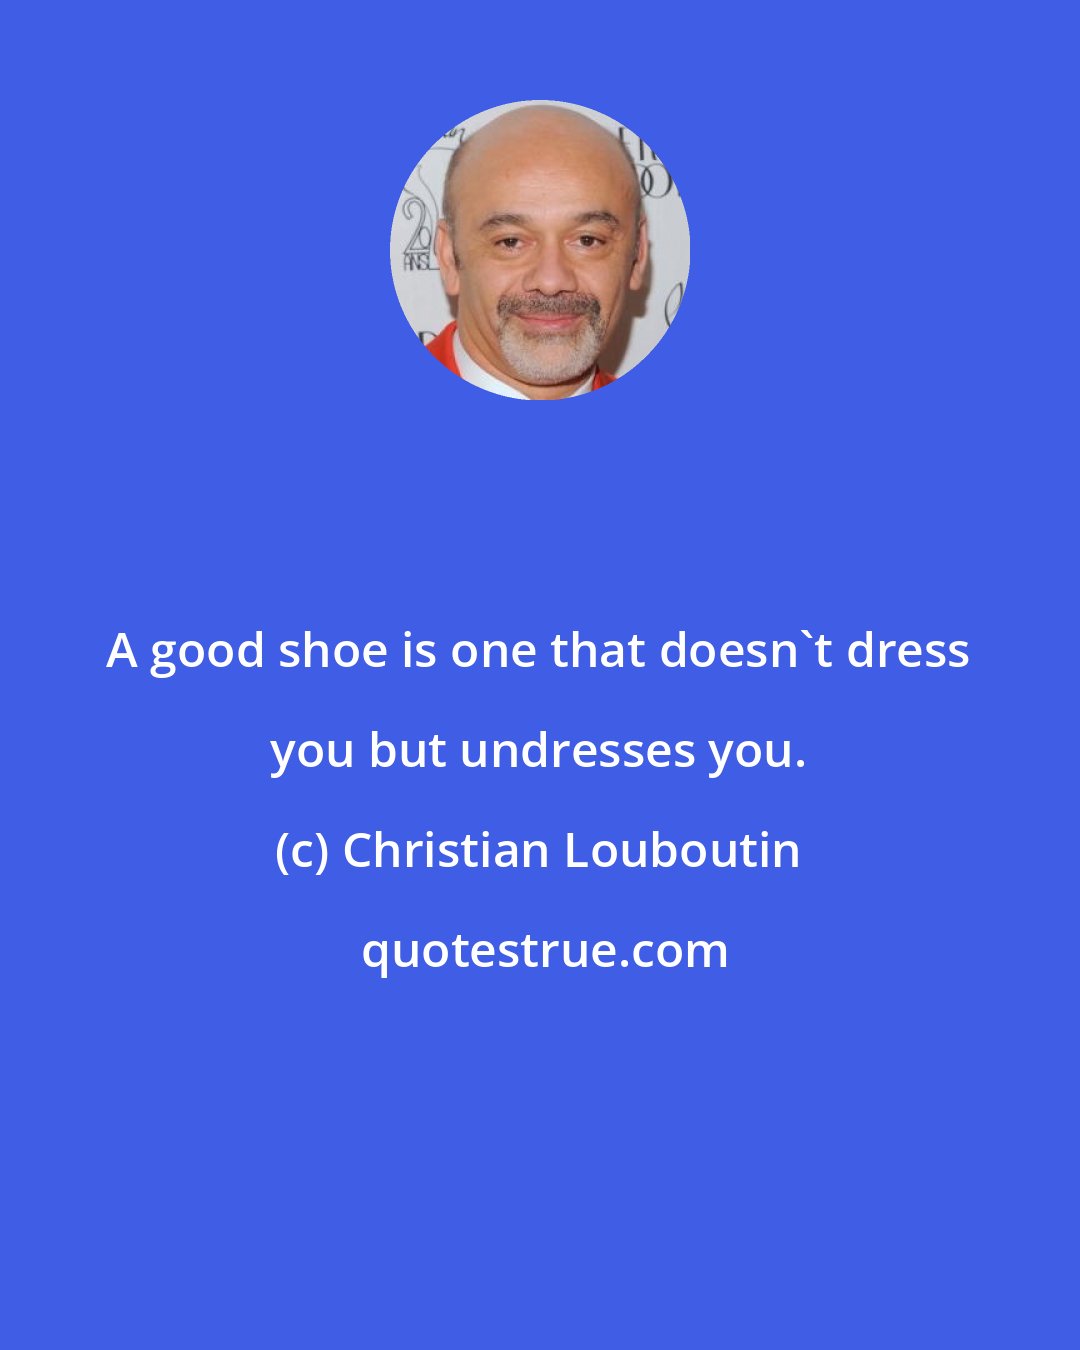 Christian Louboutin: A good shoe is one that doesn't dress you but undresses you.